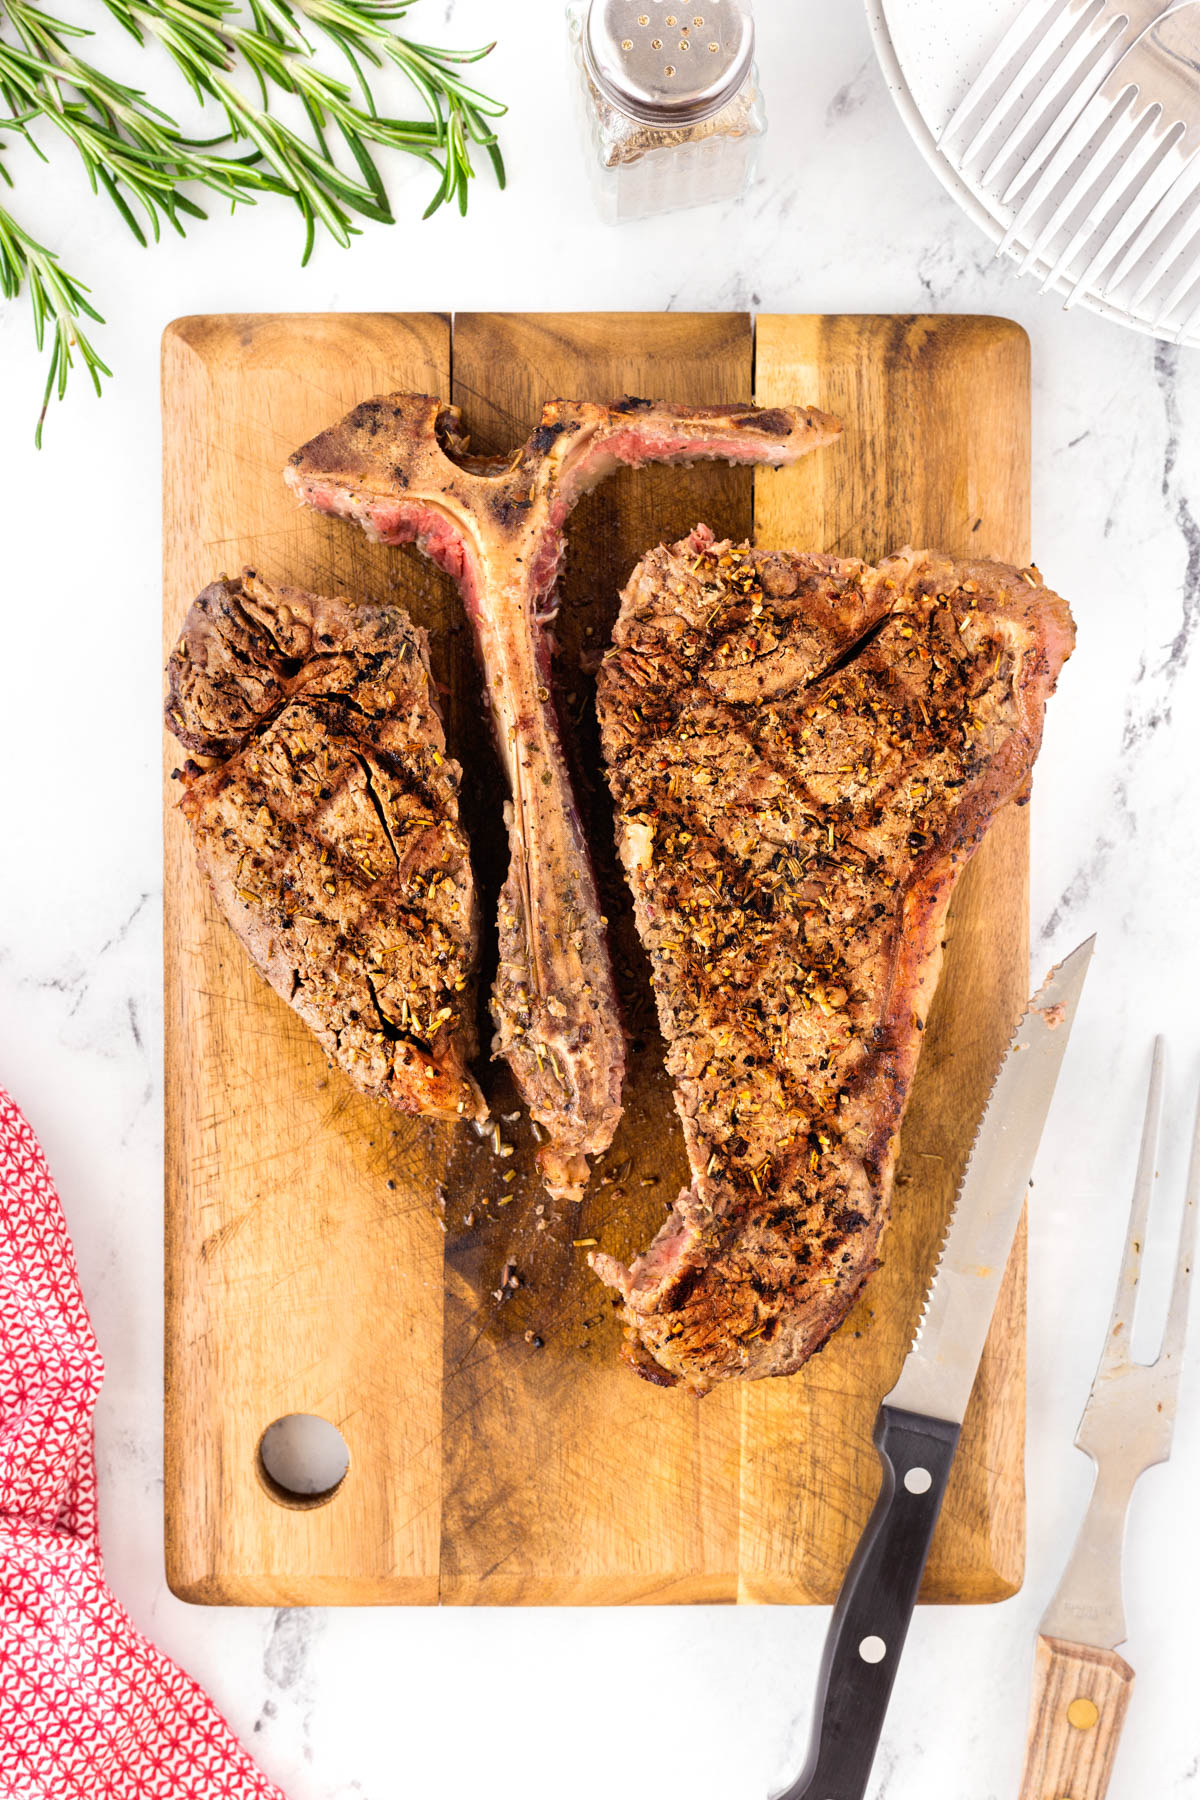 Grilled Porterhouse steak with the meat sliced away form the bone on both side of the T-bone.